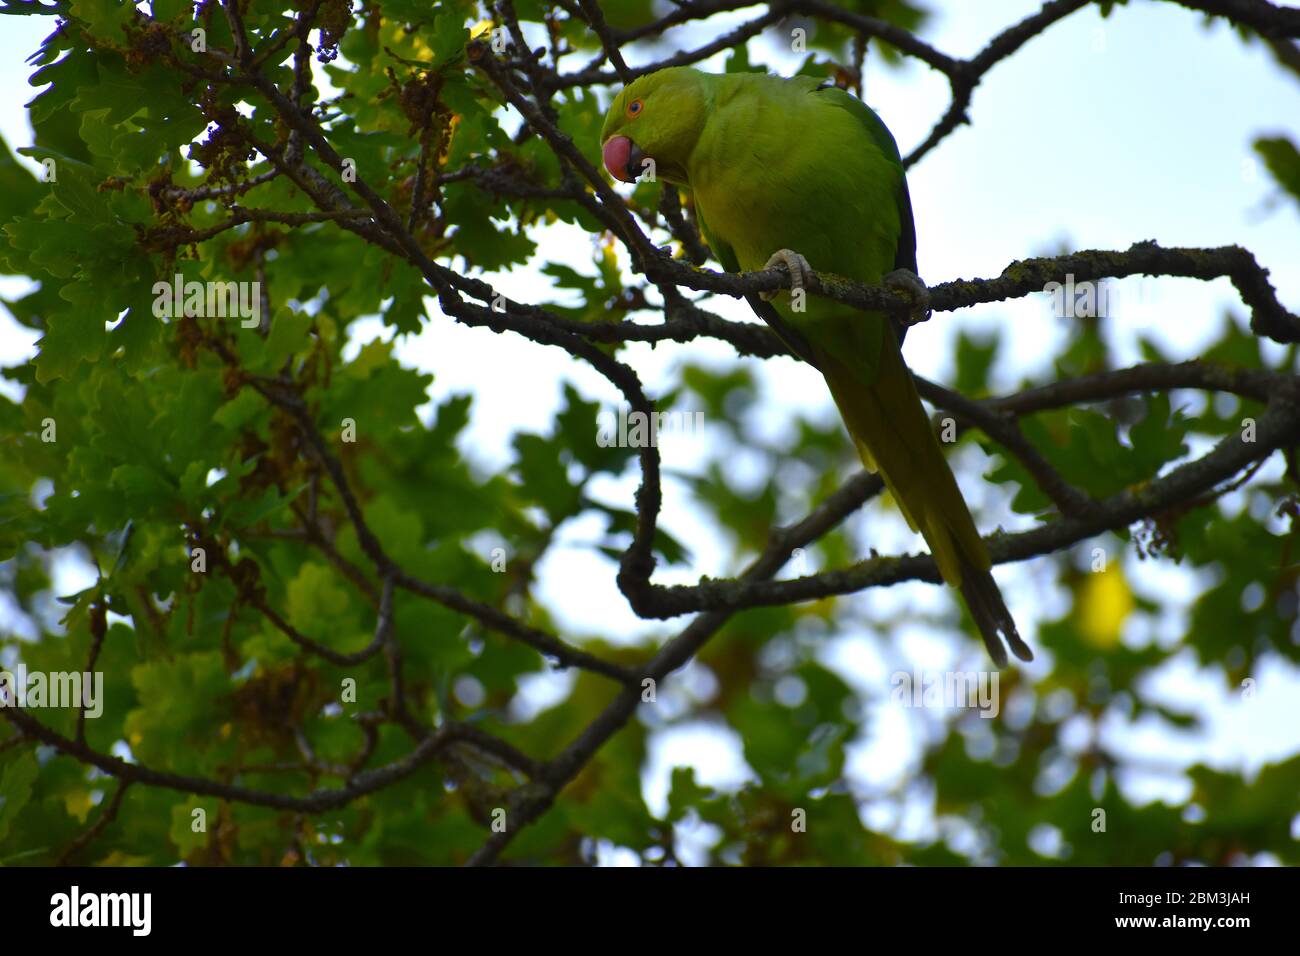 Ring necked parakeet with green plumage dark flight feathers red bill and eye circle pinkish neck. Alien species to UK seen between Windsor and London Stock Photo